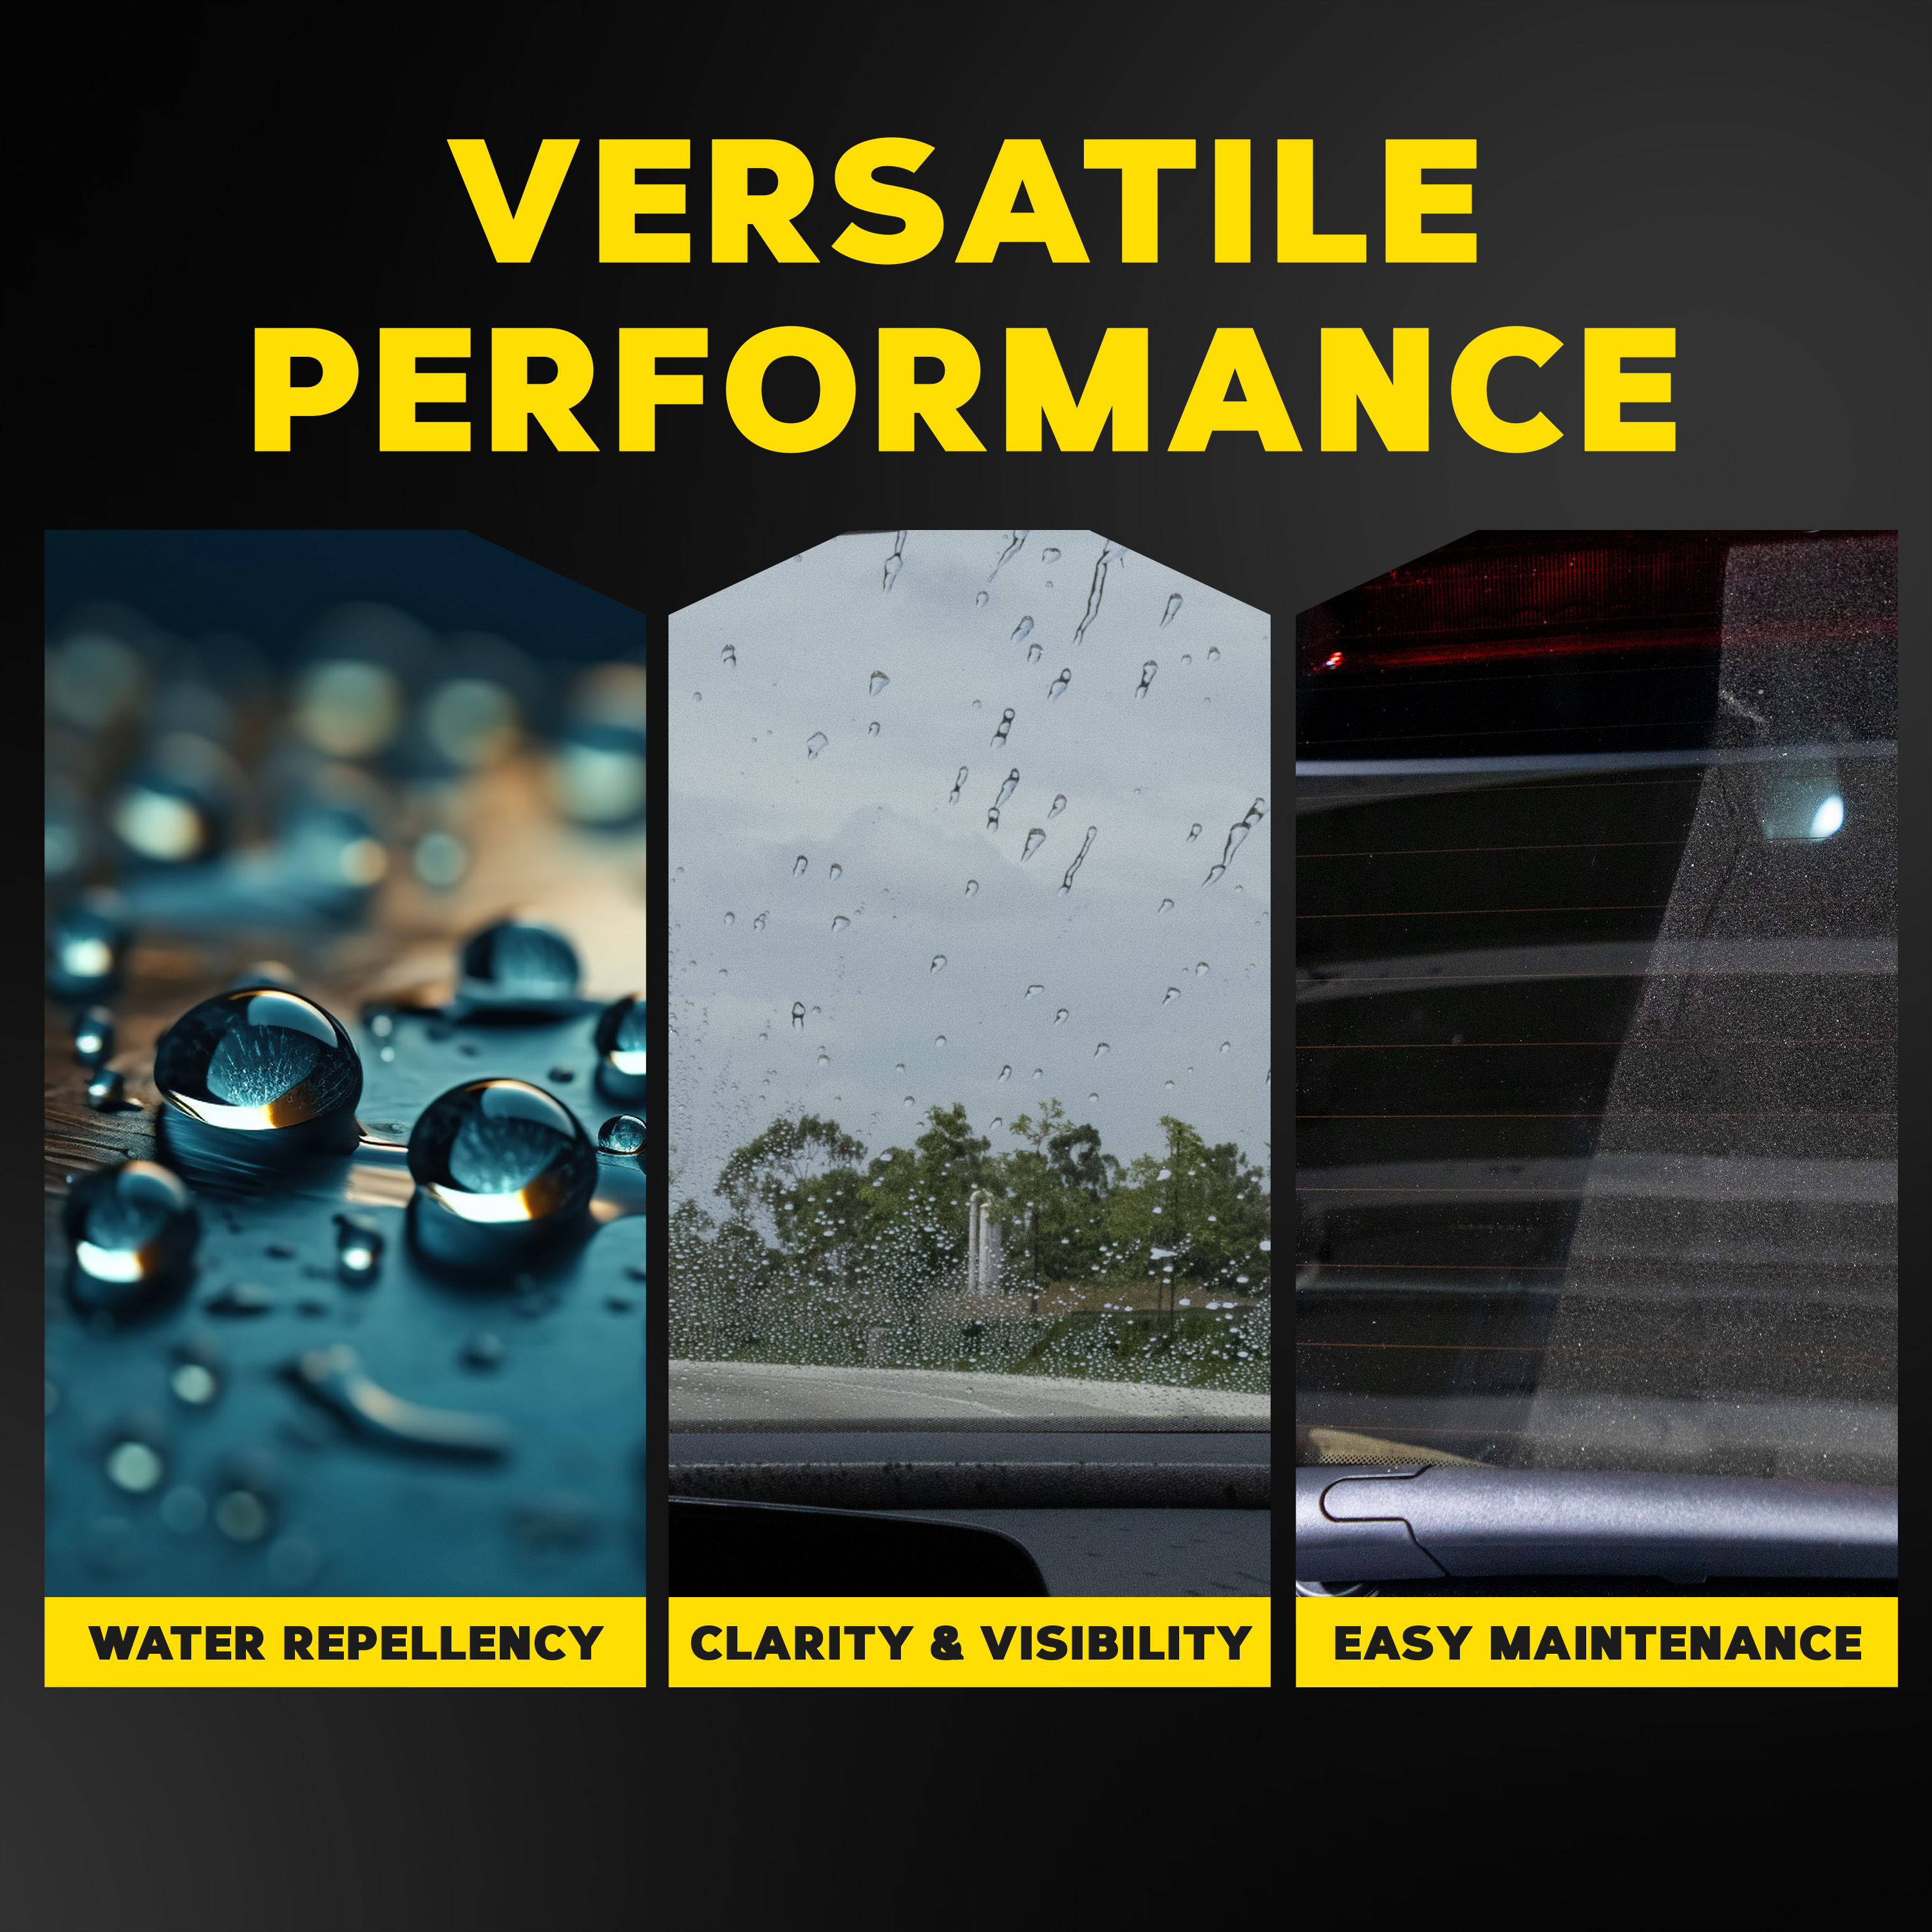 Windshield water repellent - Page 3